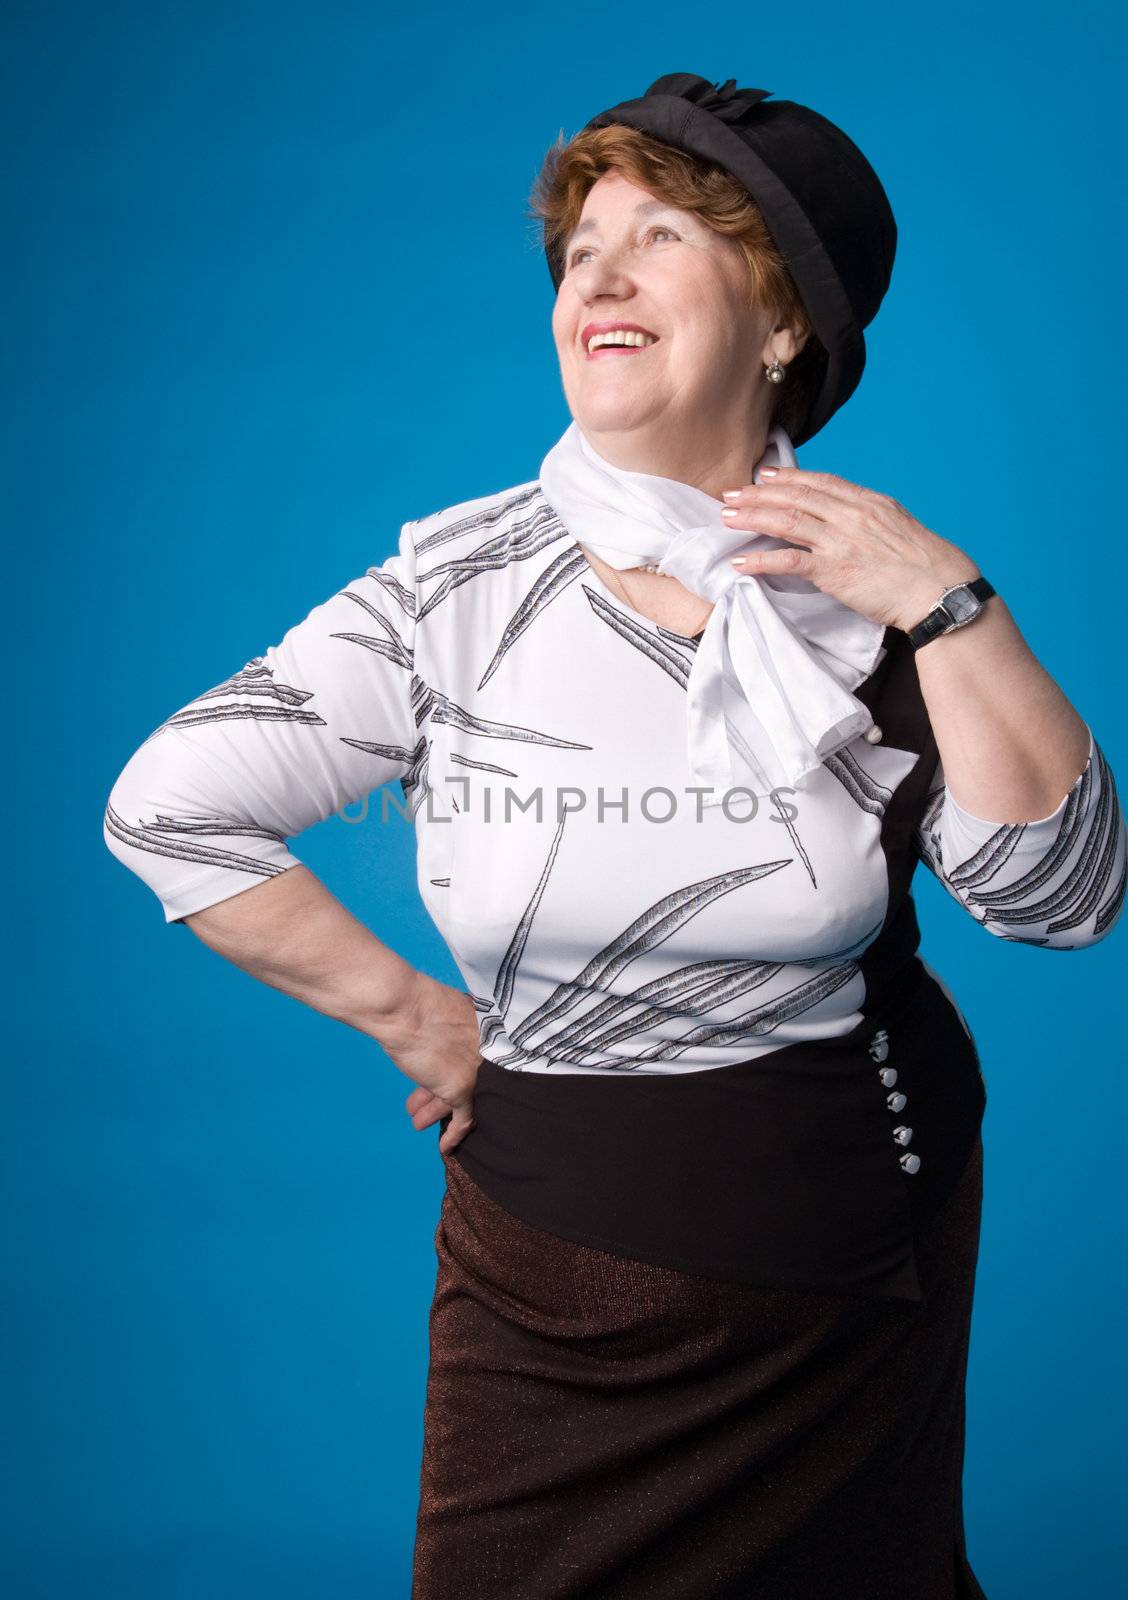 The cheerful elderly woman in a white dress on a blue background.